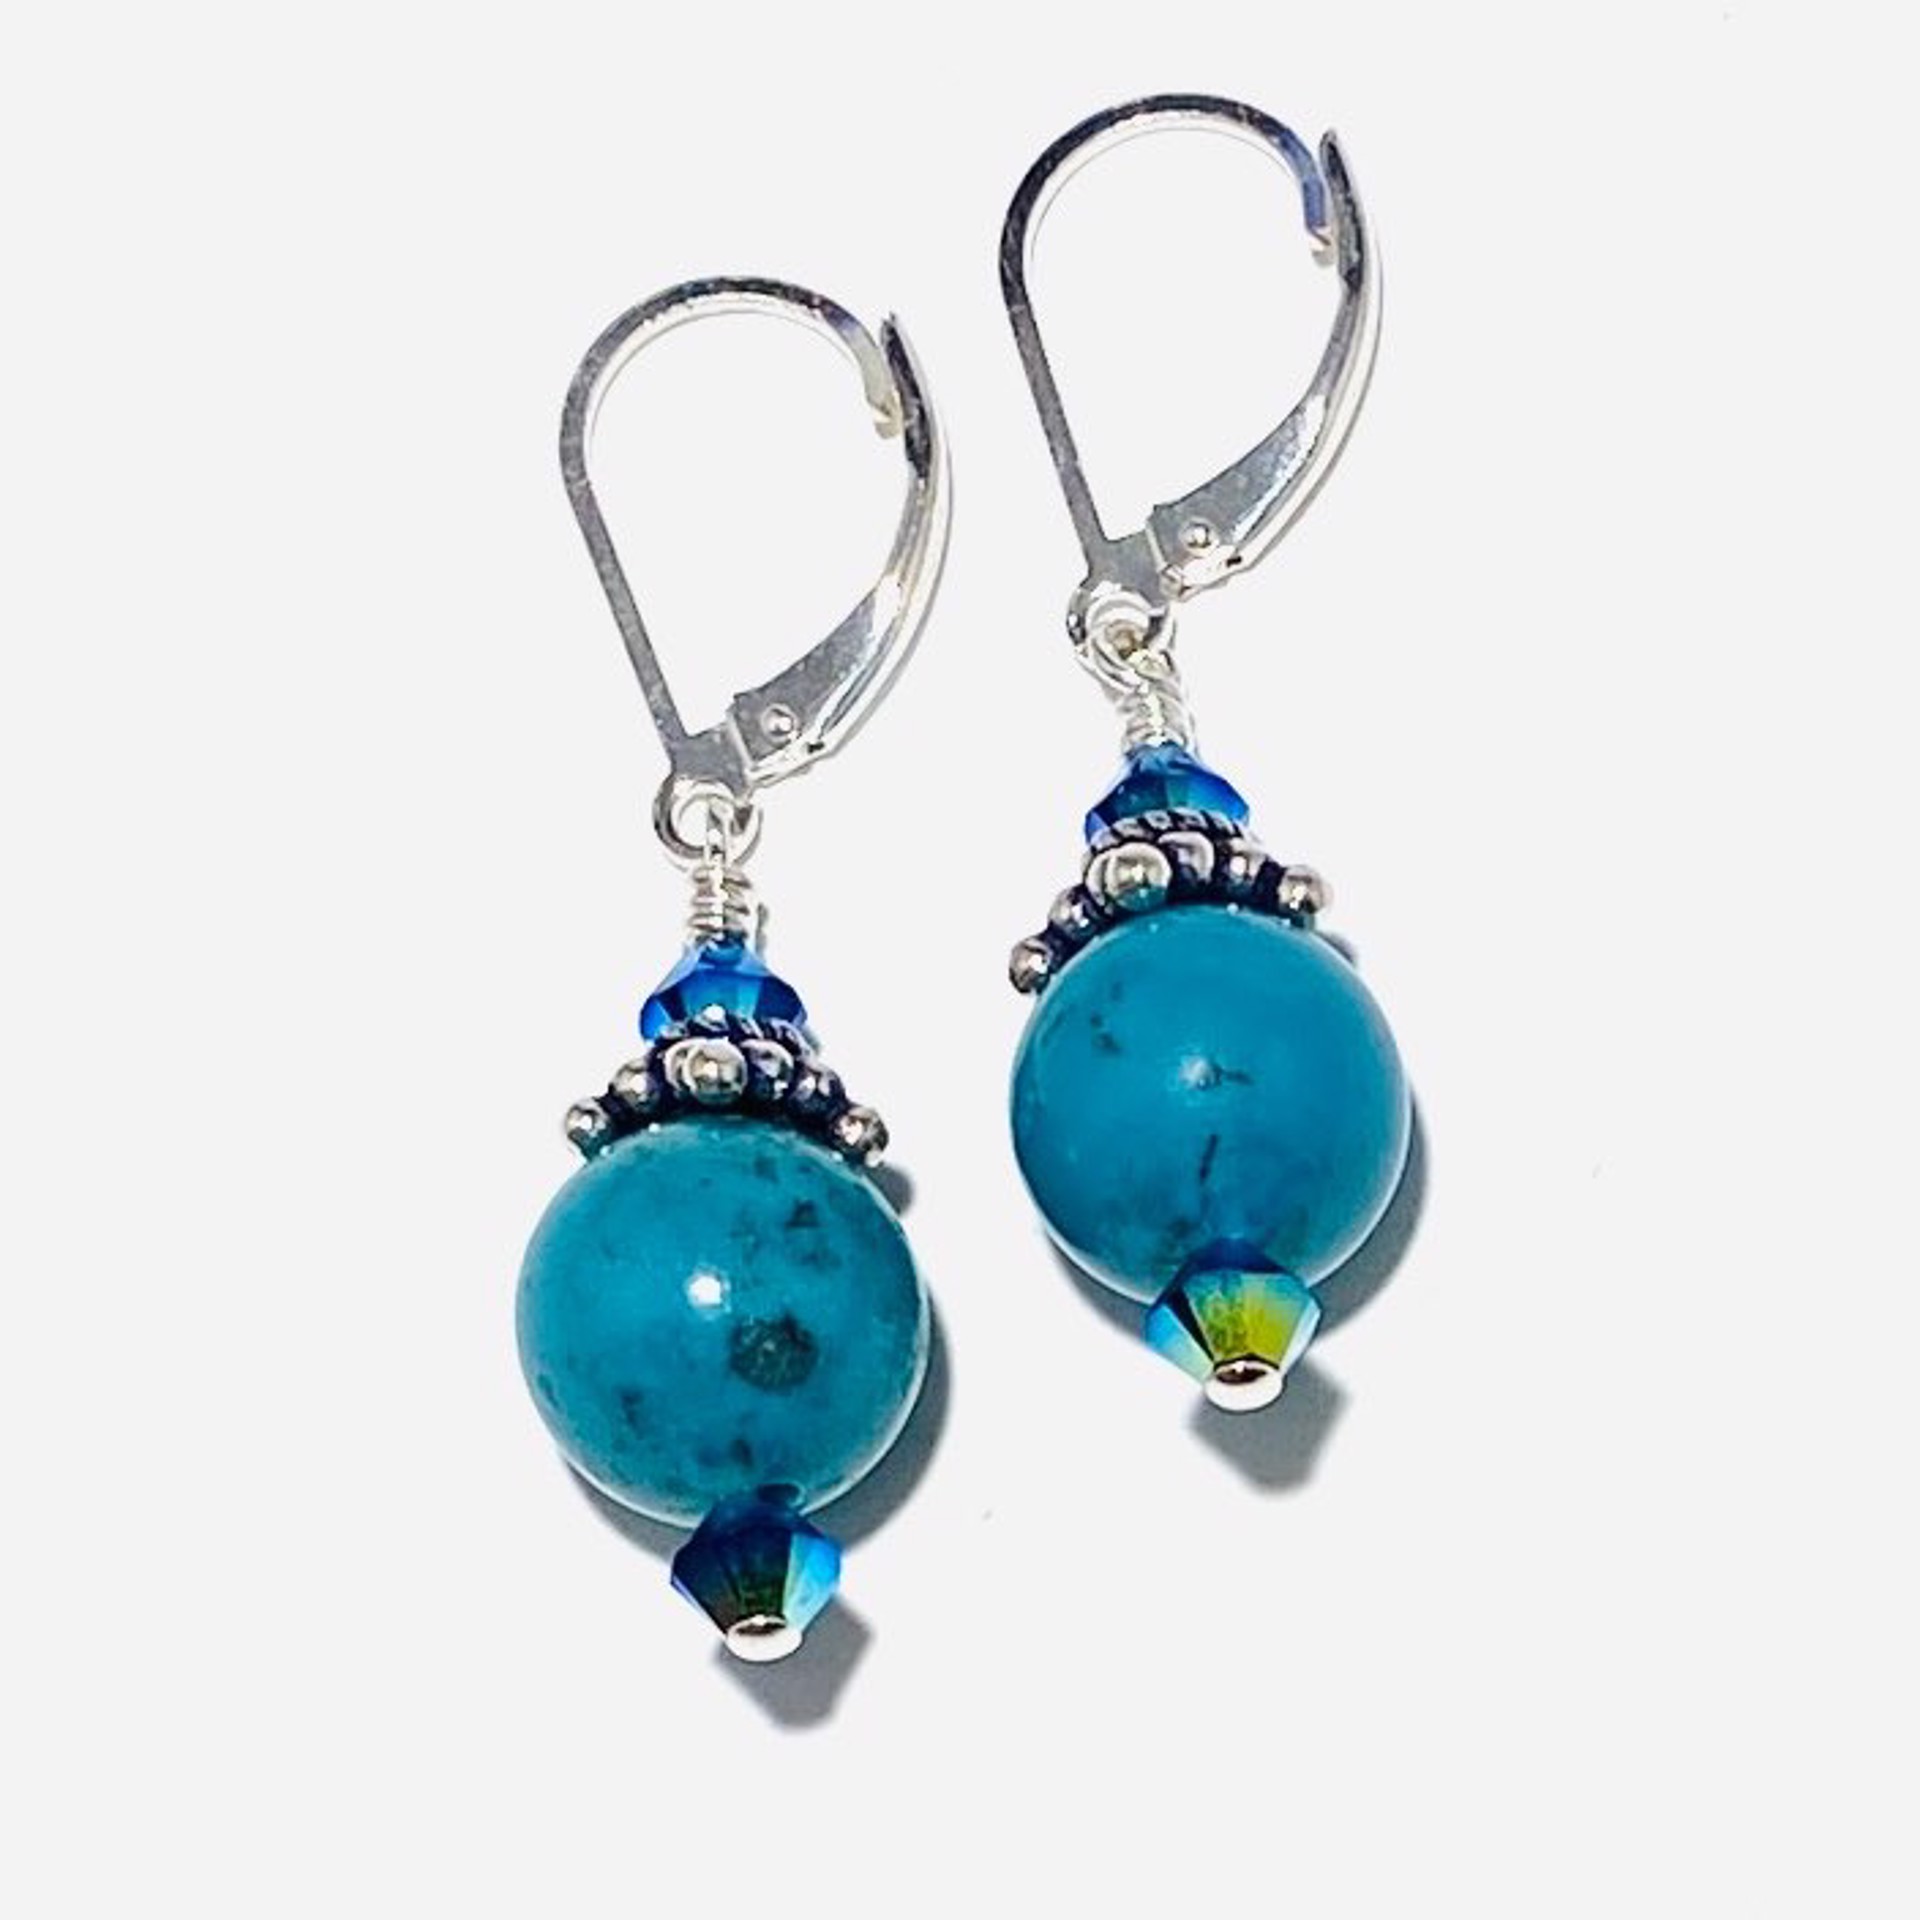 Turquoise and Swarovski Crystal Earrings SHOSH23-22 by Shoshannah Weinisch